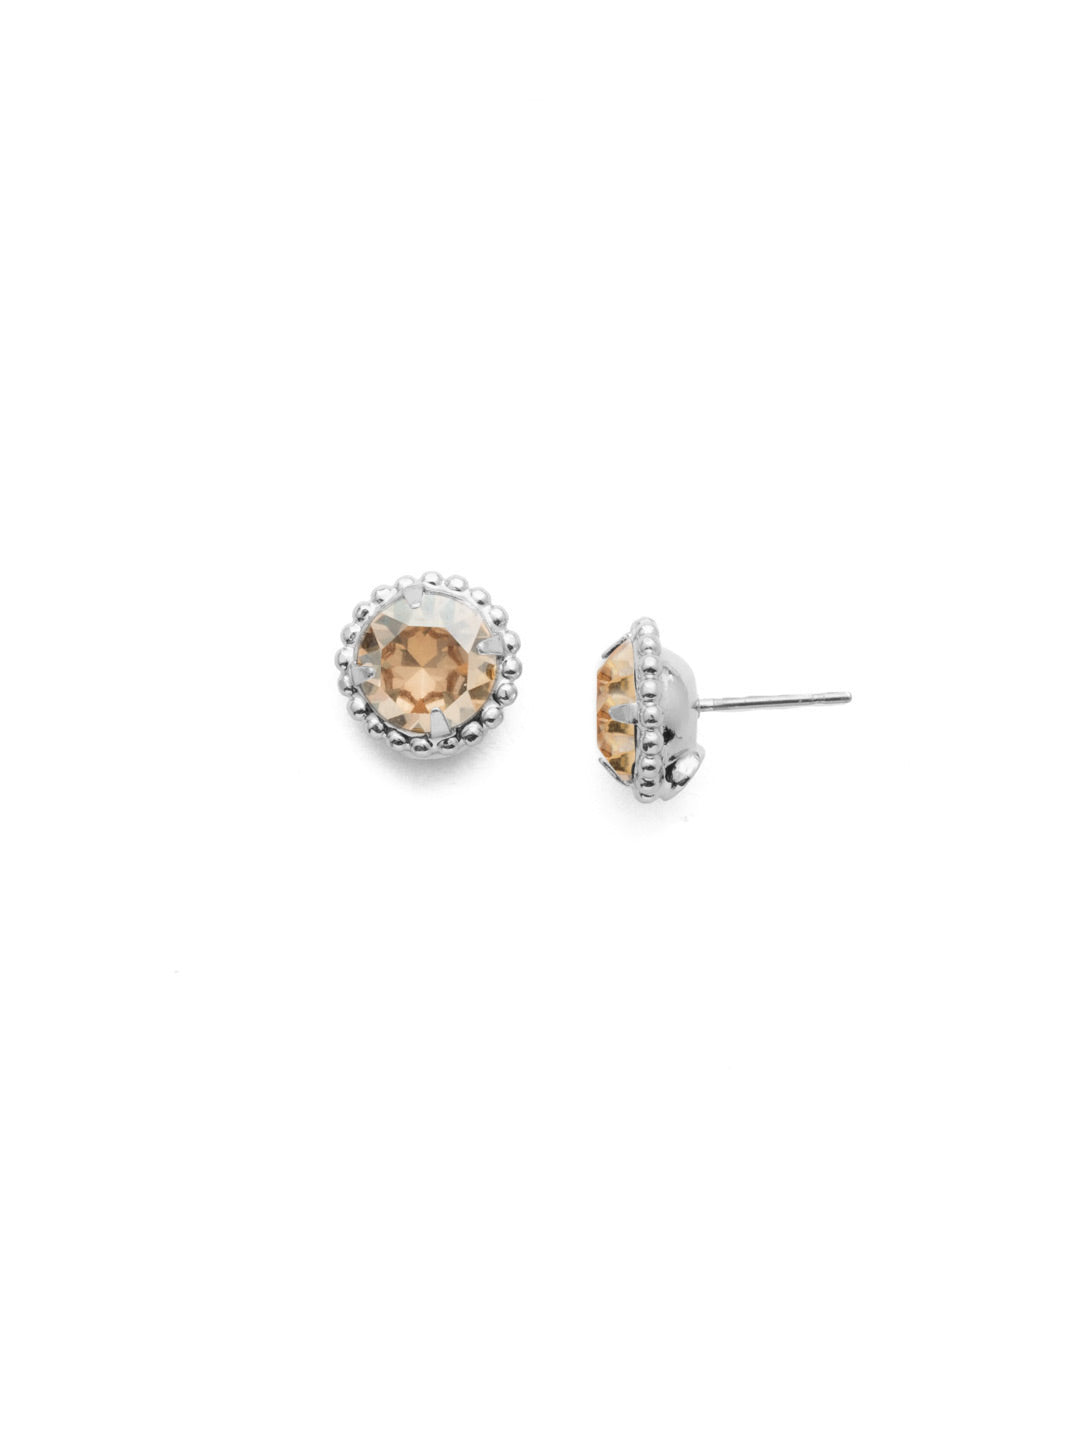 Simplicity Stud Earrings - EBY38PDDCH - <p>A timeless classic, the Simplicity Stud Earrings feature round cut crystals in a variety of colors; accented with a halo of metal beaded detail. Need help picking a stud? <a href="https://www.sorrelli.com/blogs/sisterhood/round-stud-earrings-101-a-rundown-of-sizes-styles-and-sparkle">Check out our size guide!</a> From Sorrelli's Dark Champagne collection in our Palladium finish.</p>